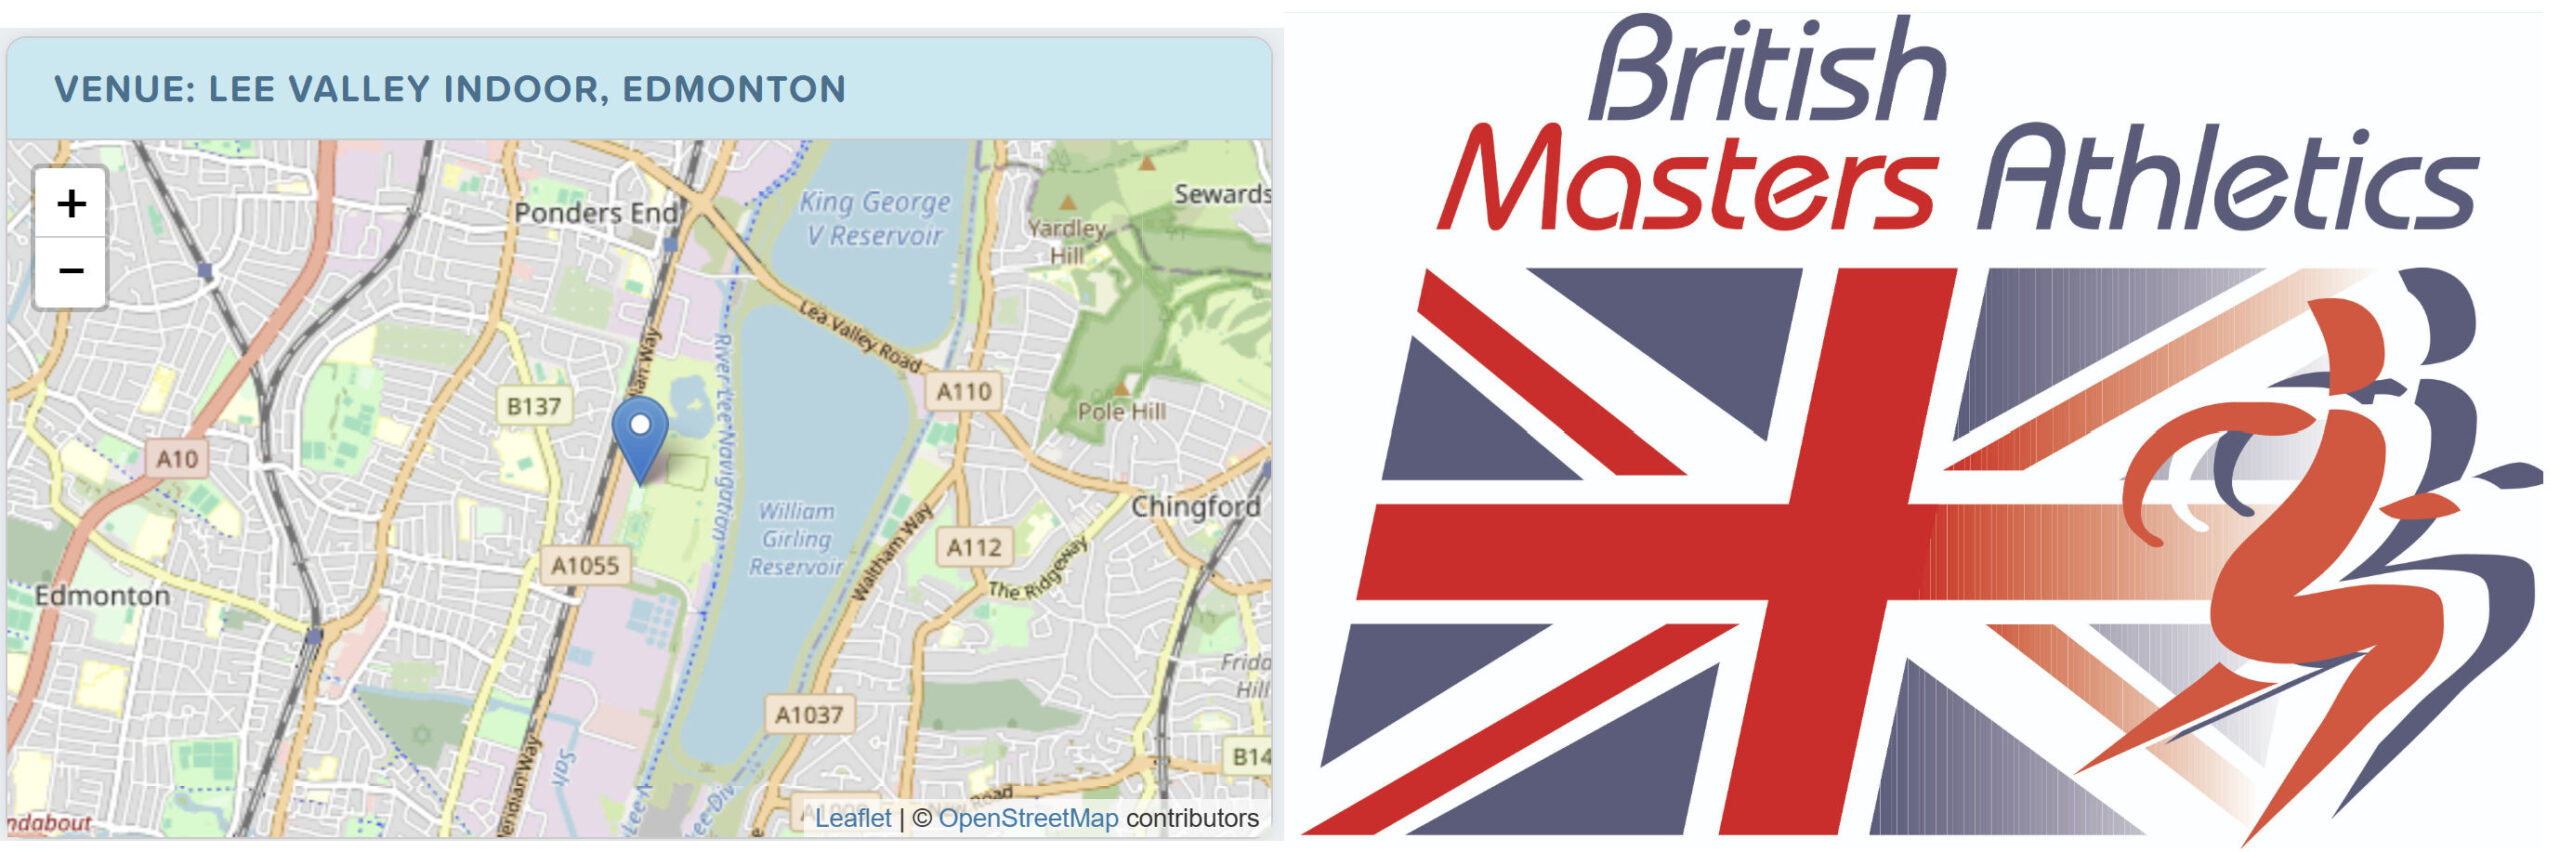 BMAF logo and Lee Valley map